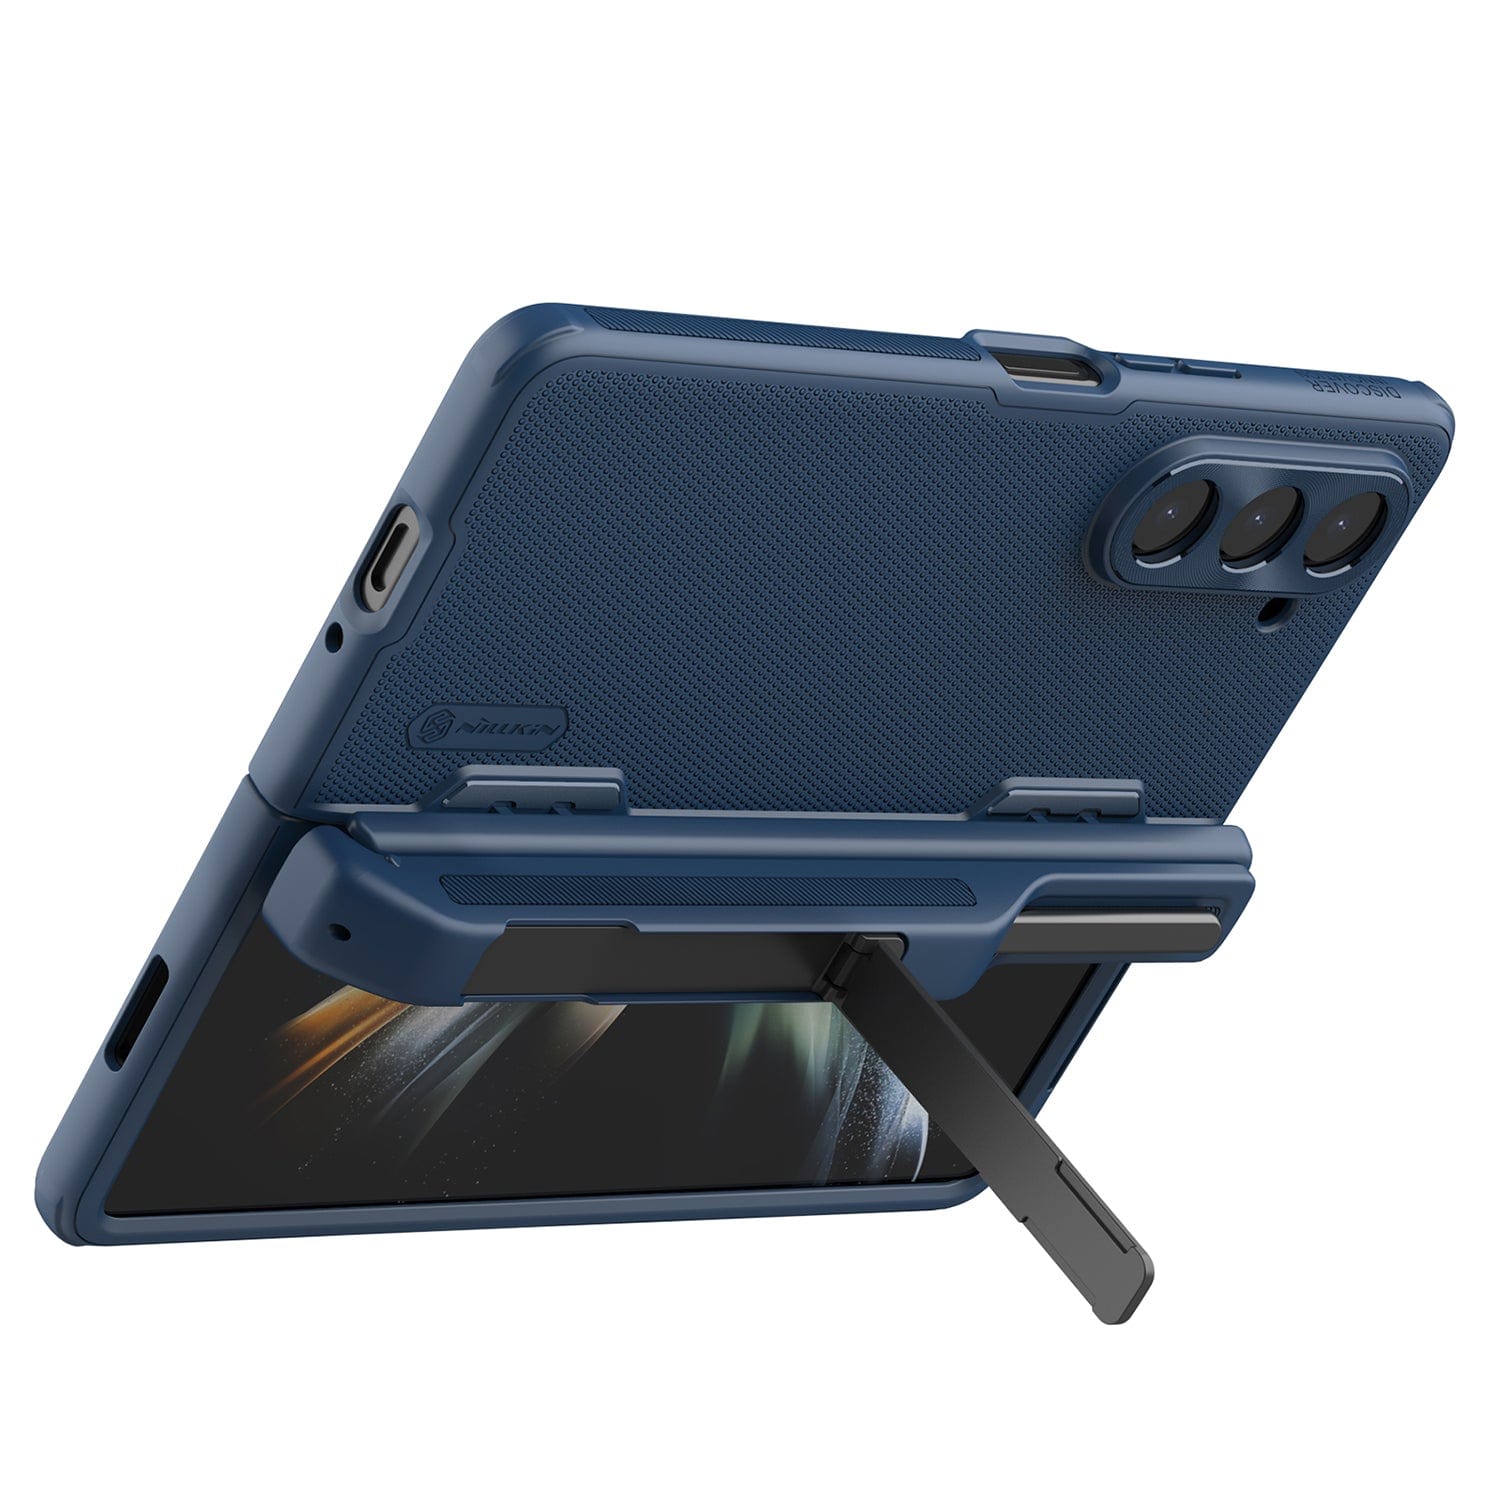 GRIP Series with Kickstand and Stylus Compatibility Case for Samsung Galaxy Z Fold5 - Blue